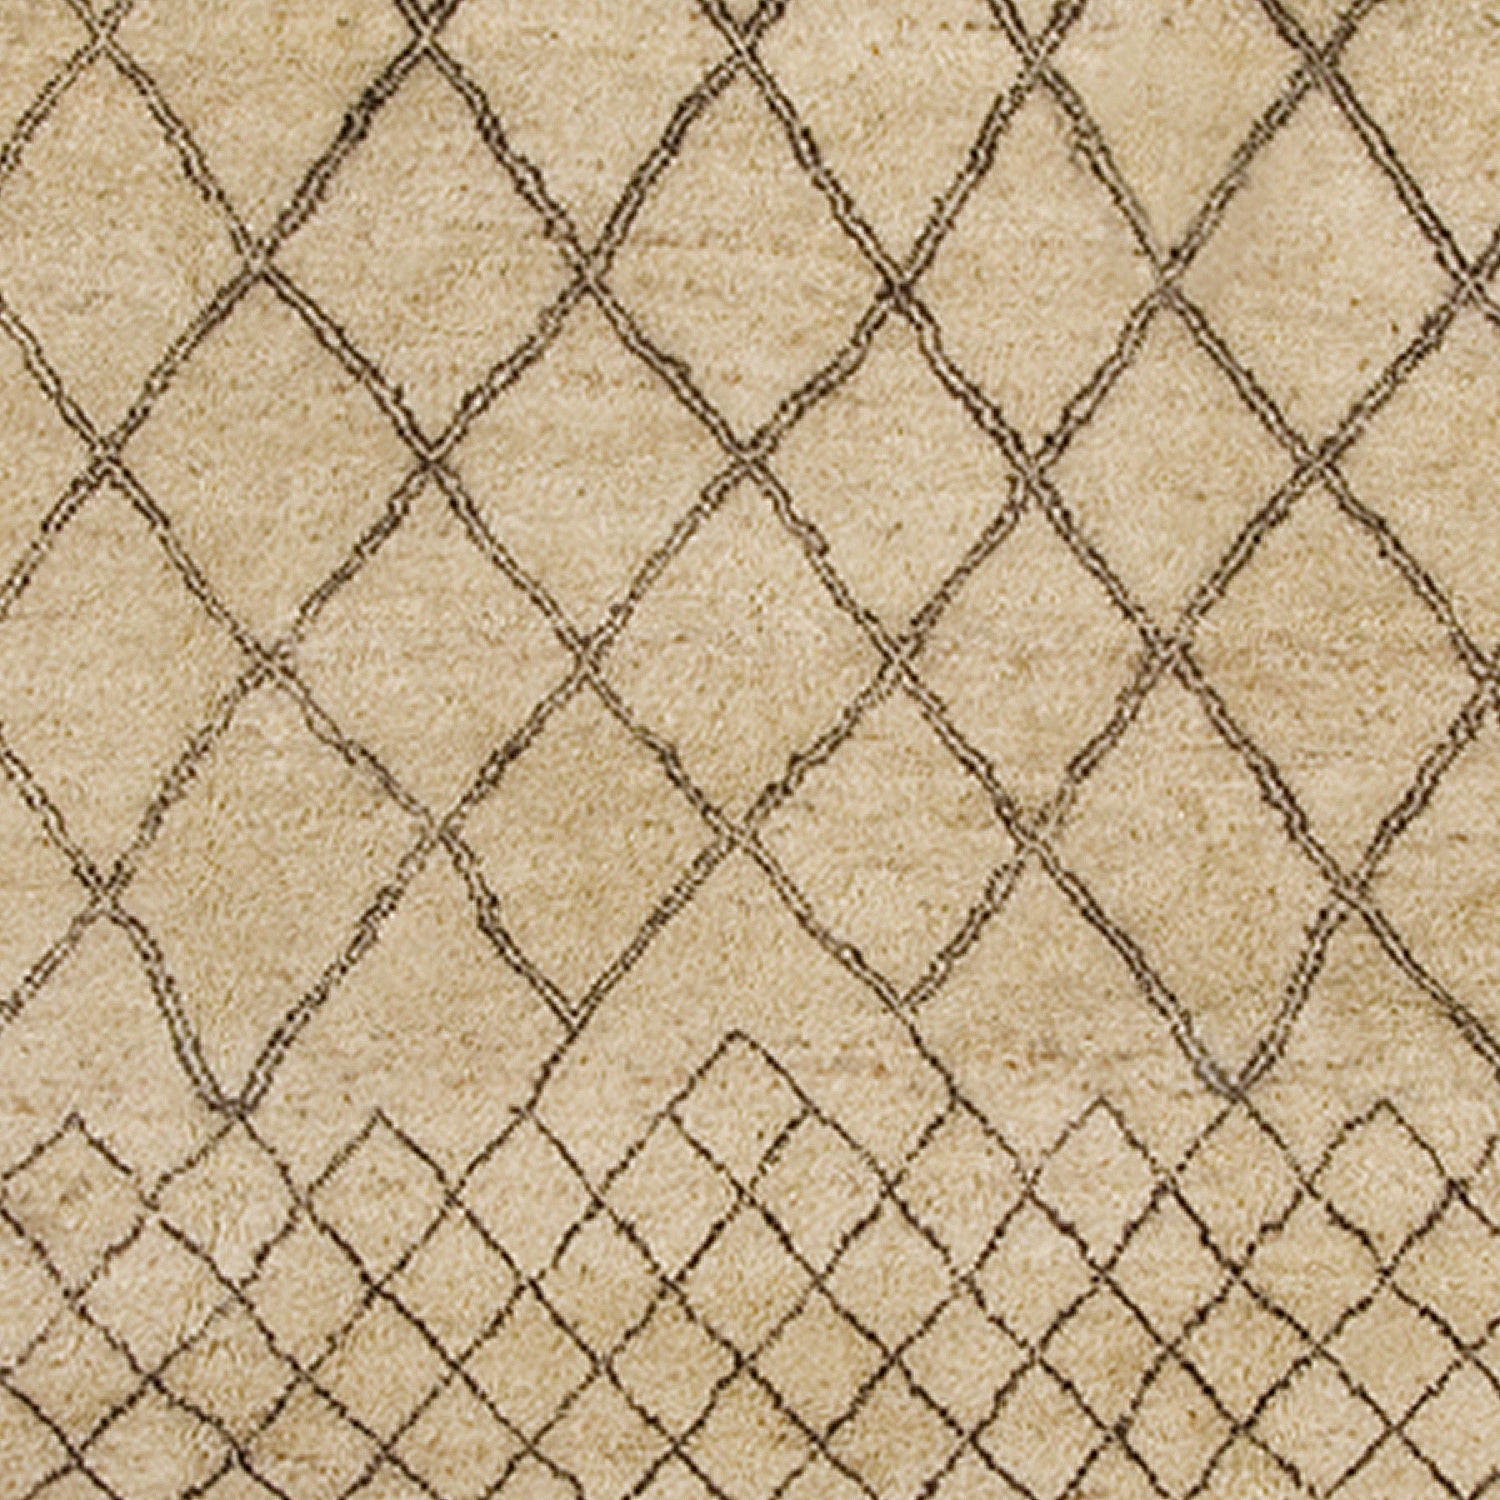 Woven rug swatch in a large-scale diamond pattern that transitions to a smaller-scale diamond pattern in black lines on a tan field.